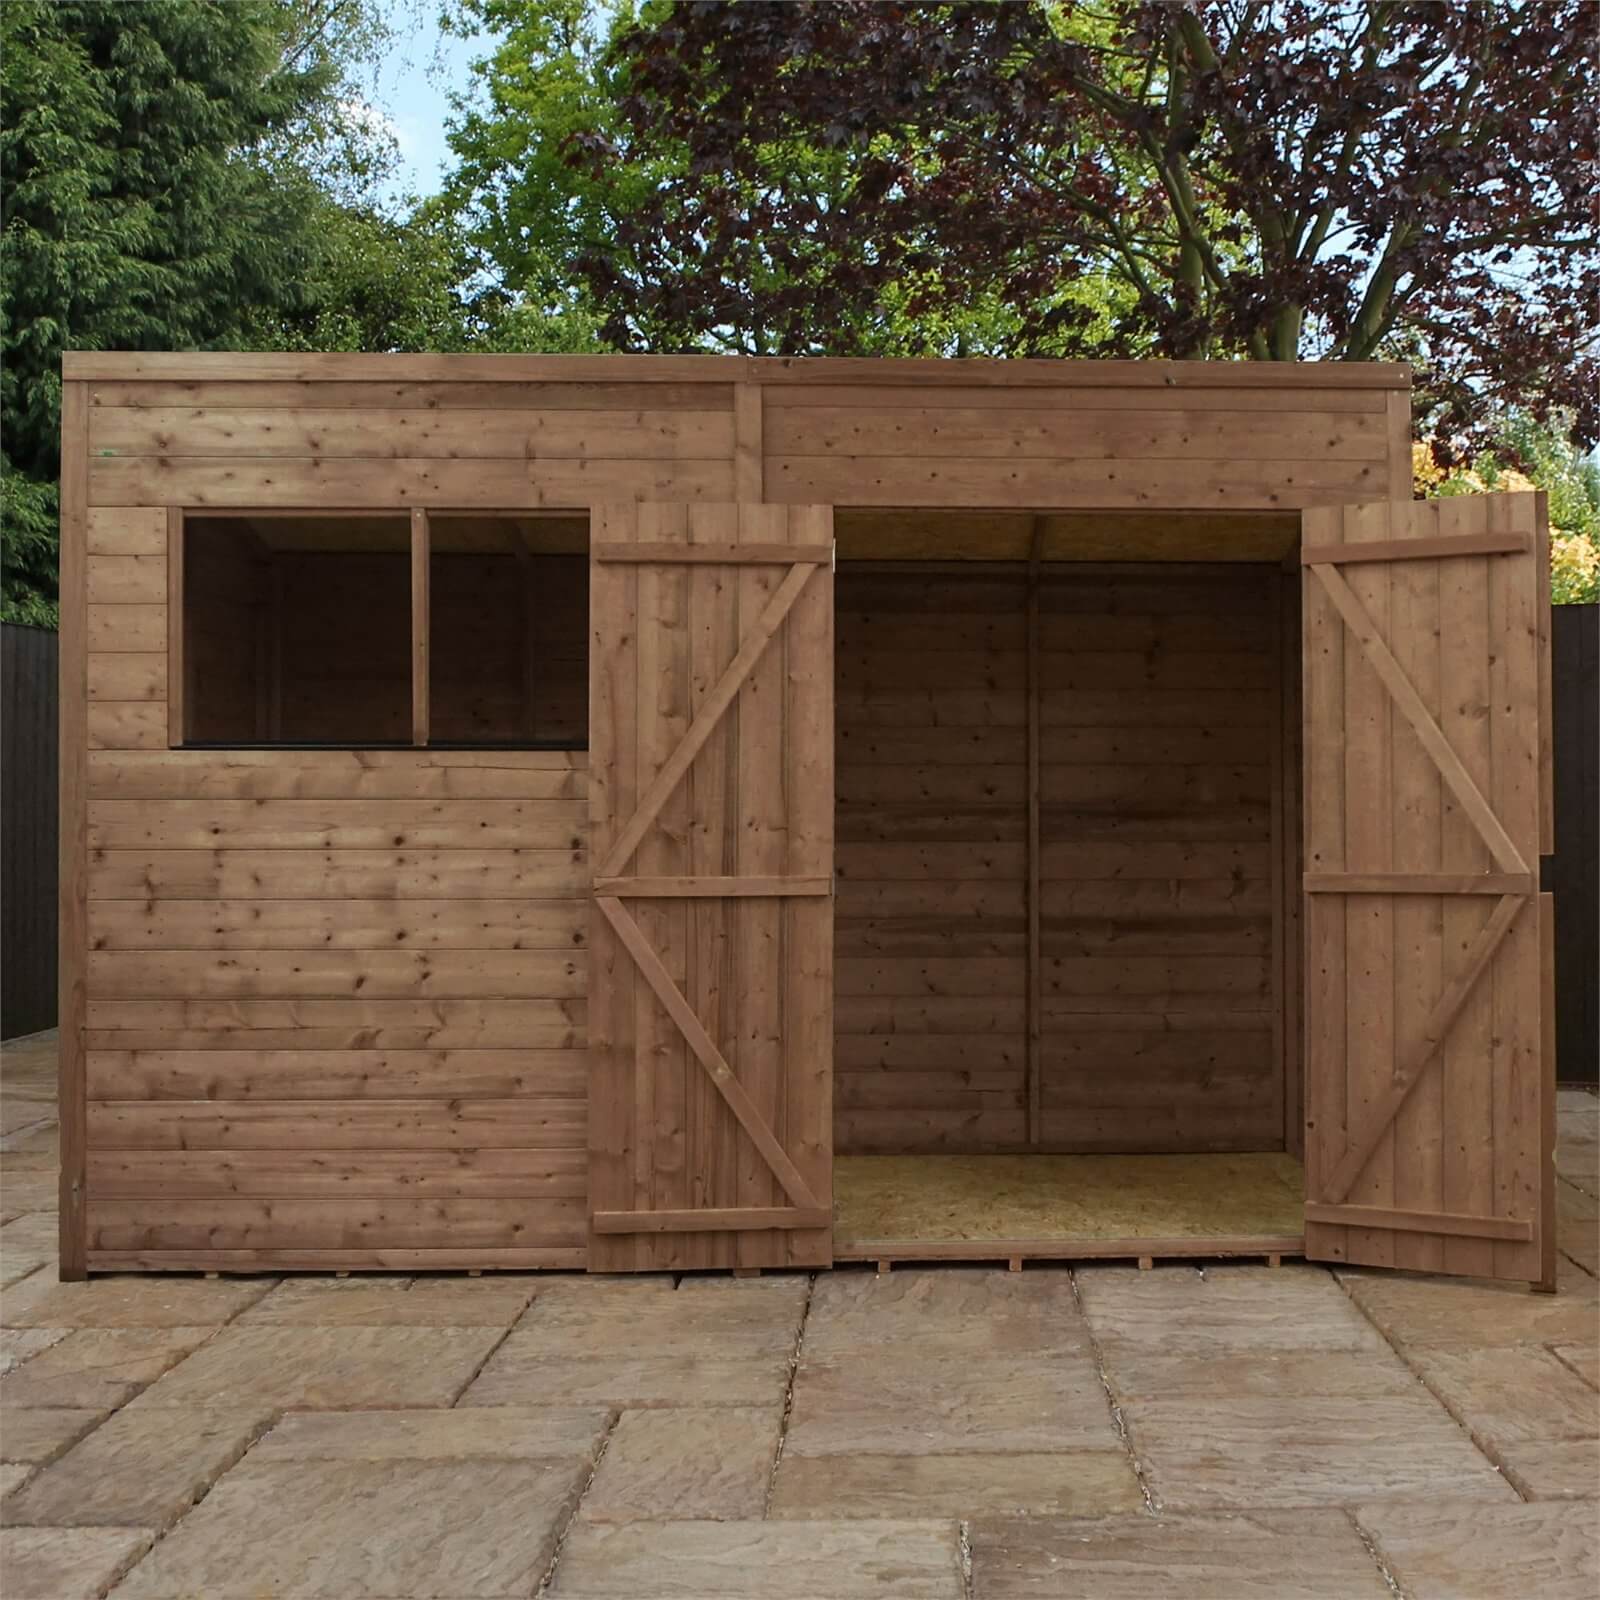 Mercia 10x8ft Pressure Treated Pent Wooden Shed